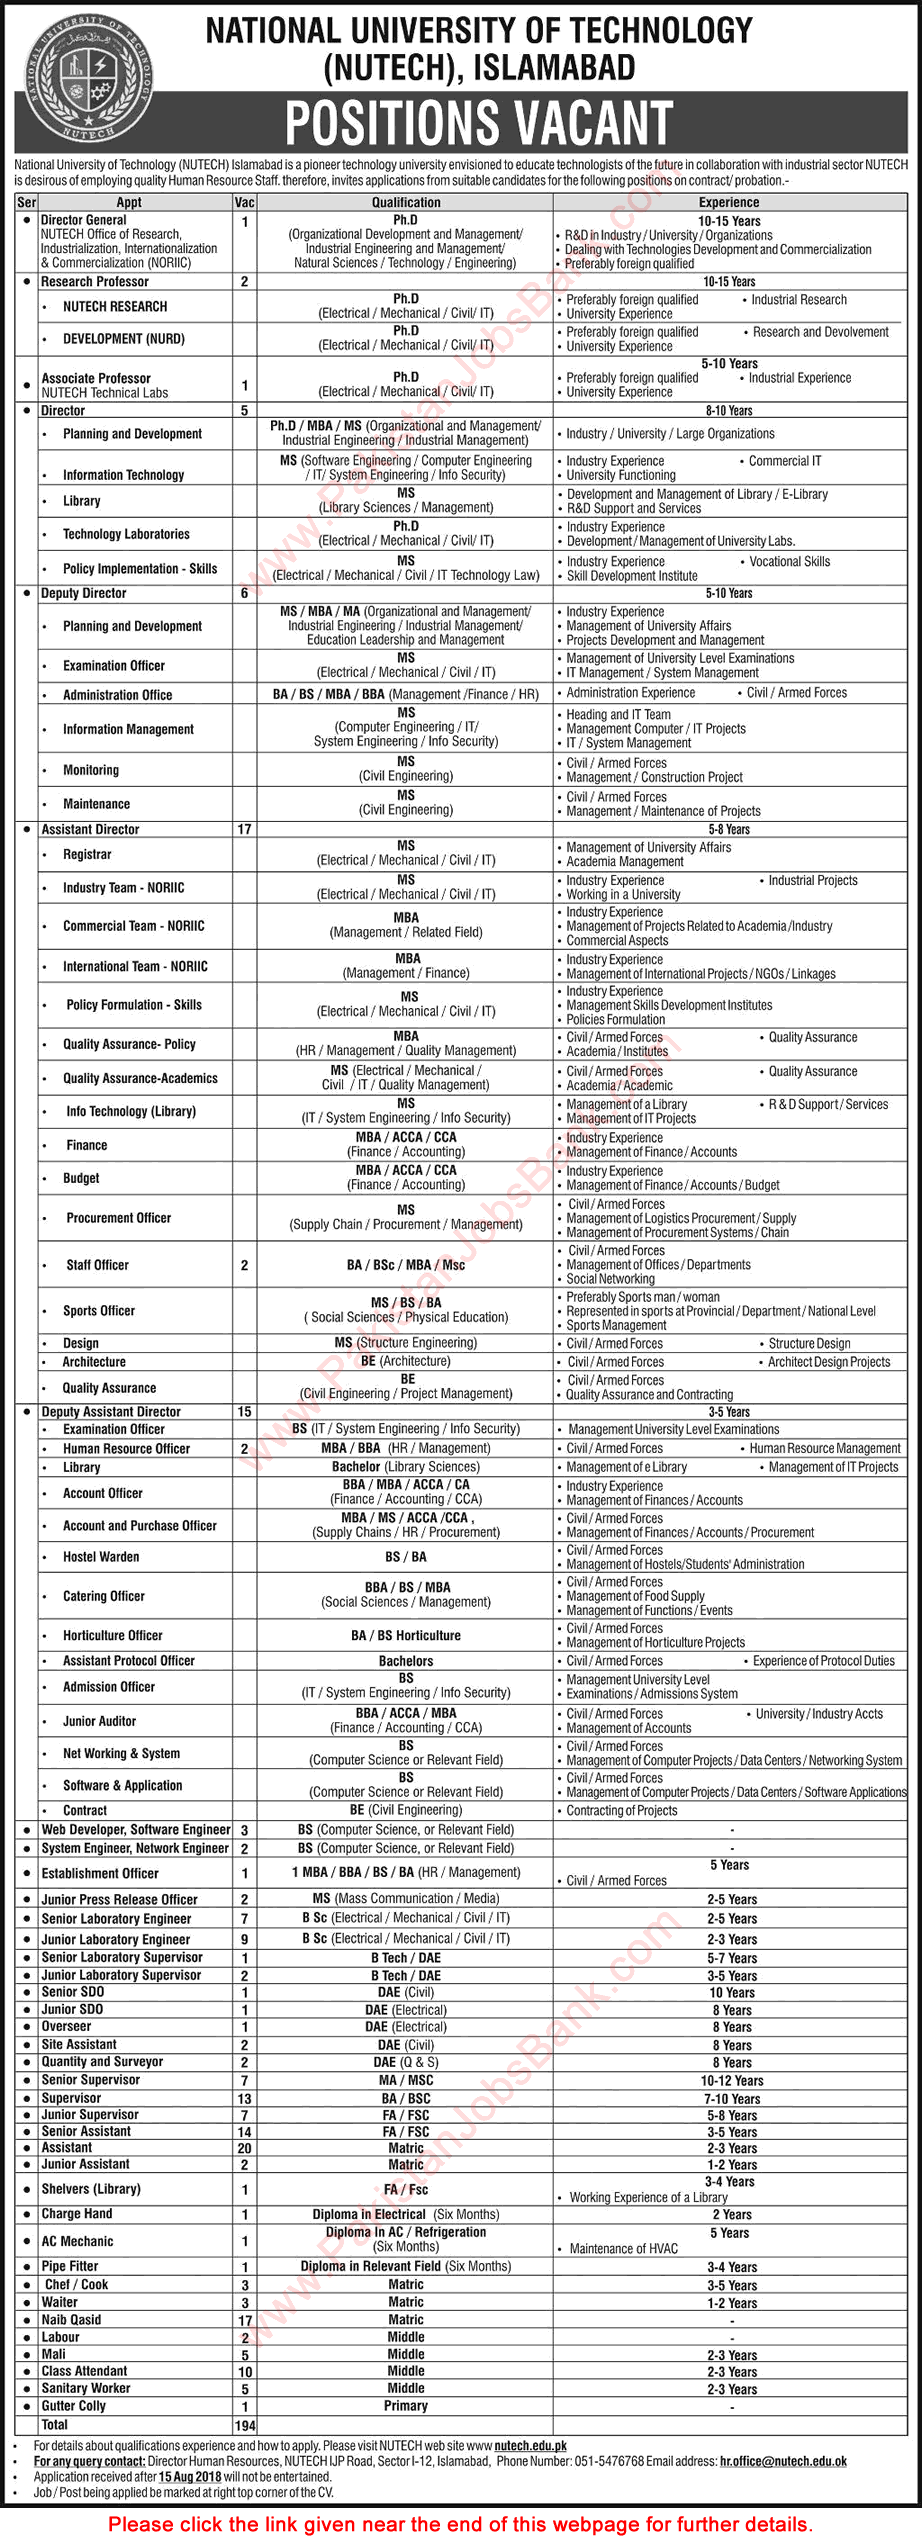 National University of Technology Islamabad Jobs July 2018 August Assistant Directors, Supervisors & Others Latest